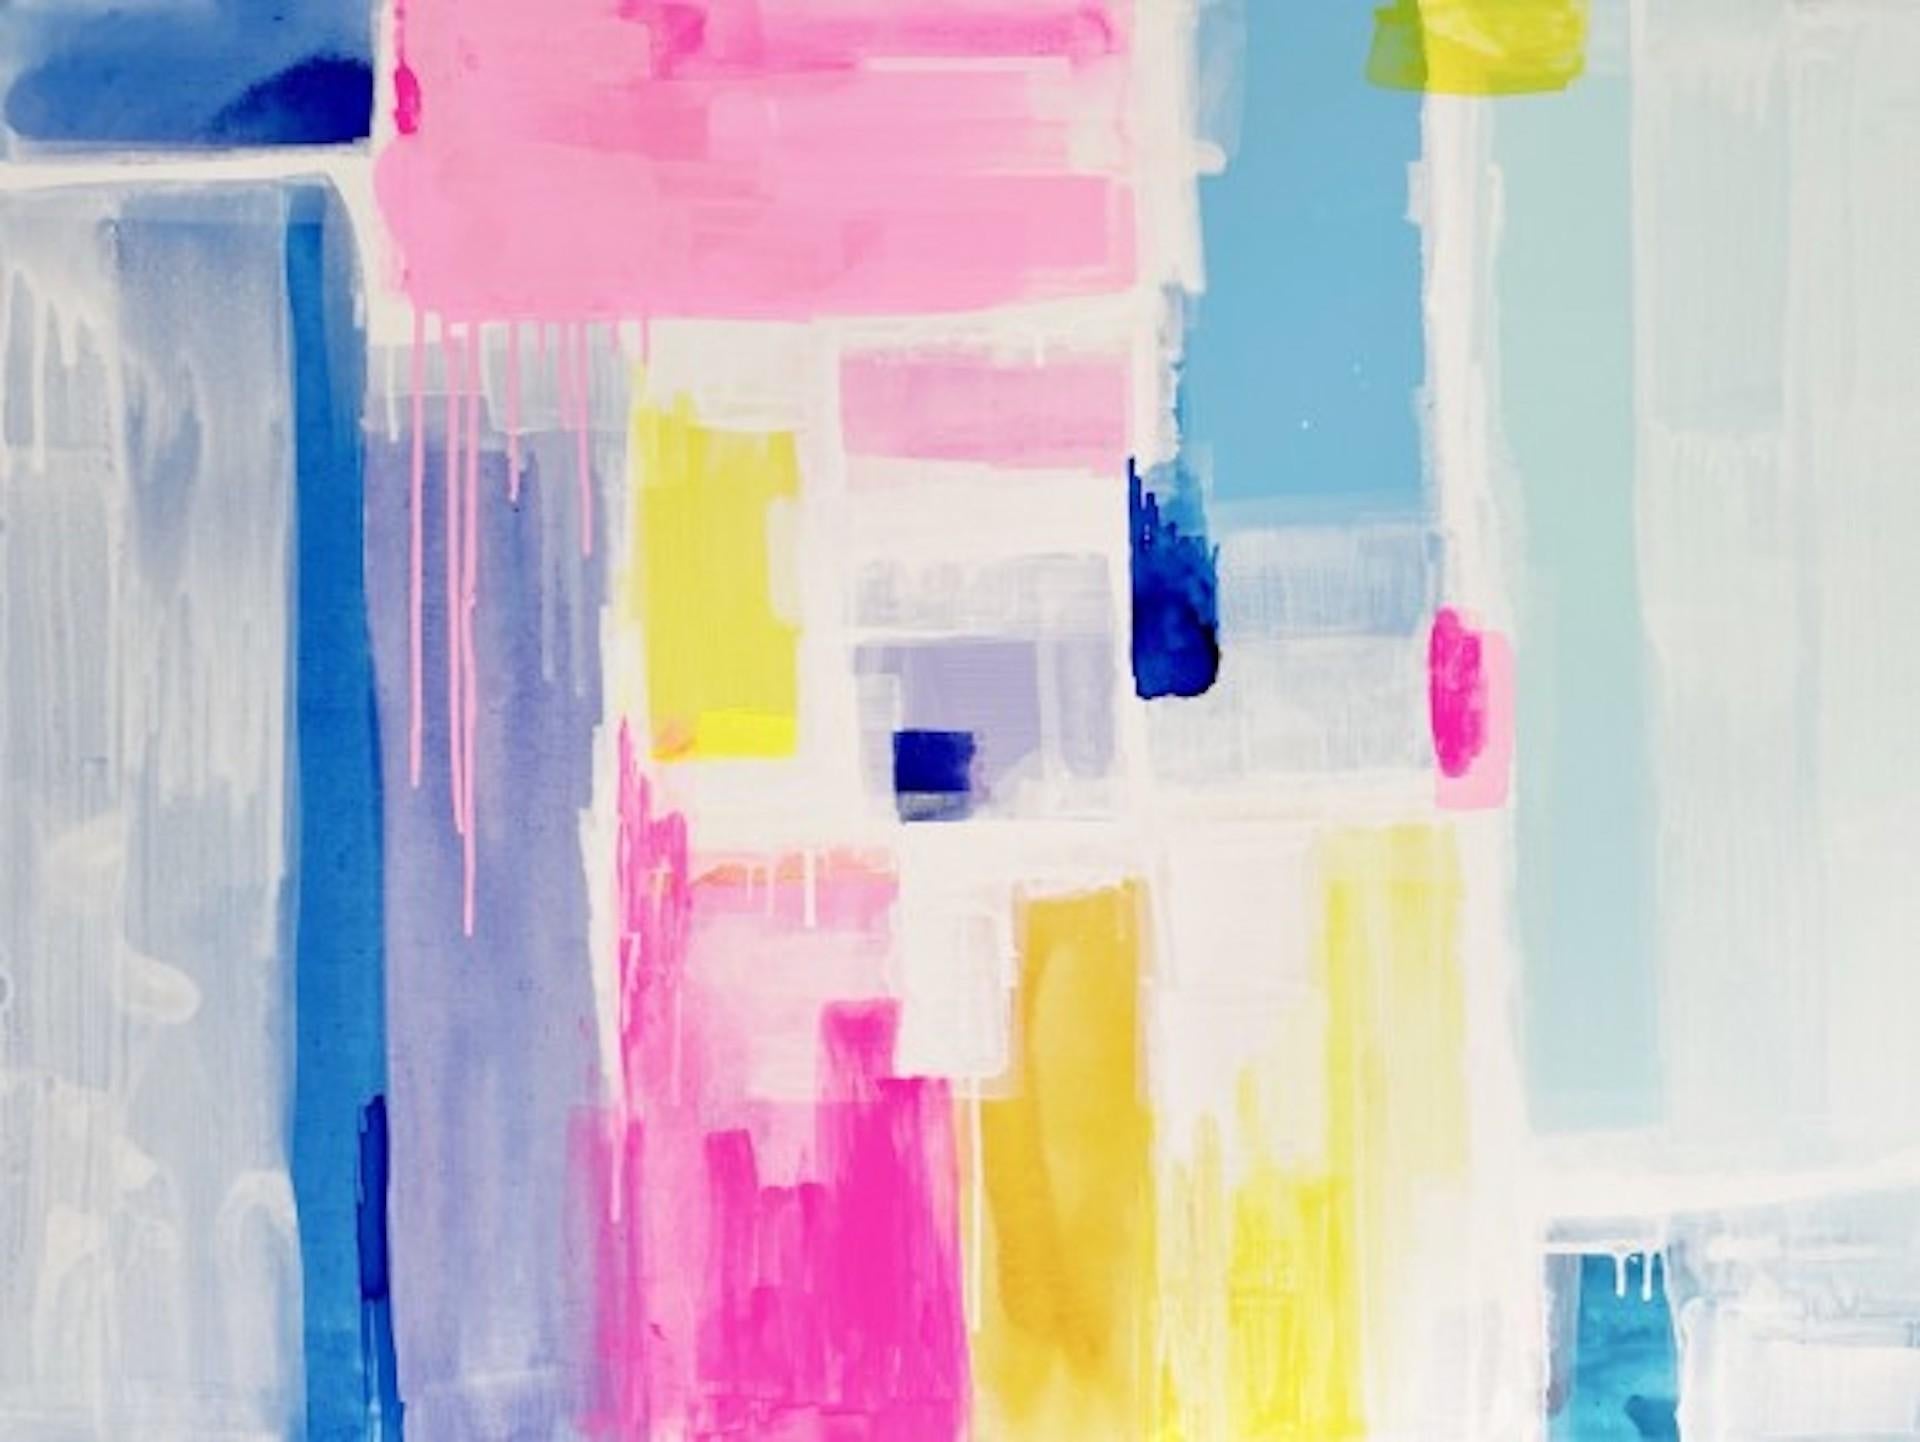 Rebecca Newport
Dreaming in Colour
Dreaming in Colour is an original abstract painting by Rebecca Newport. Rebecca has created this piece using layers of pastels and fluorescents. The abstract shapes give this piece a bright and striking look and